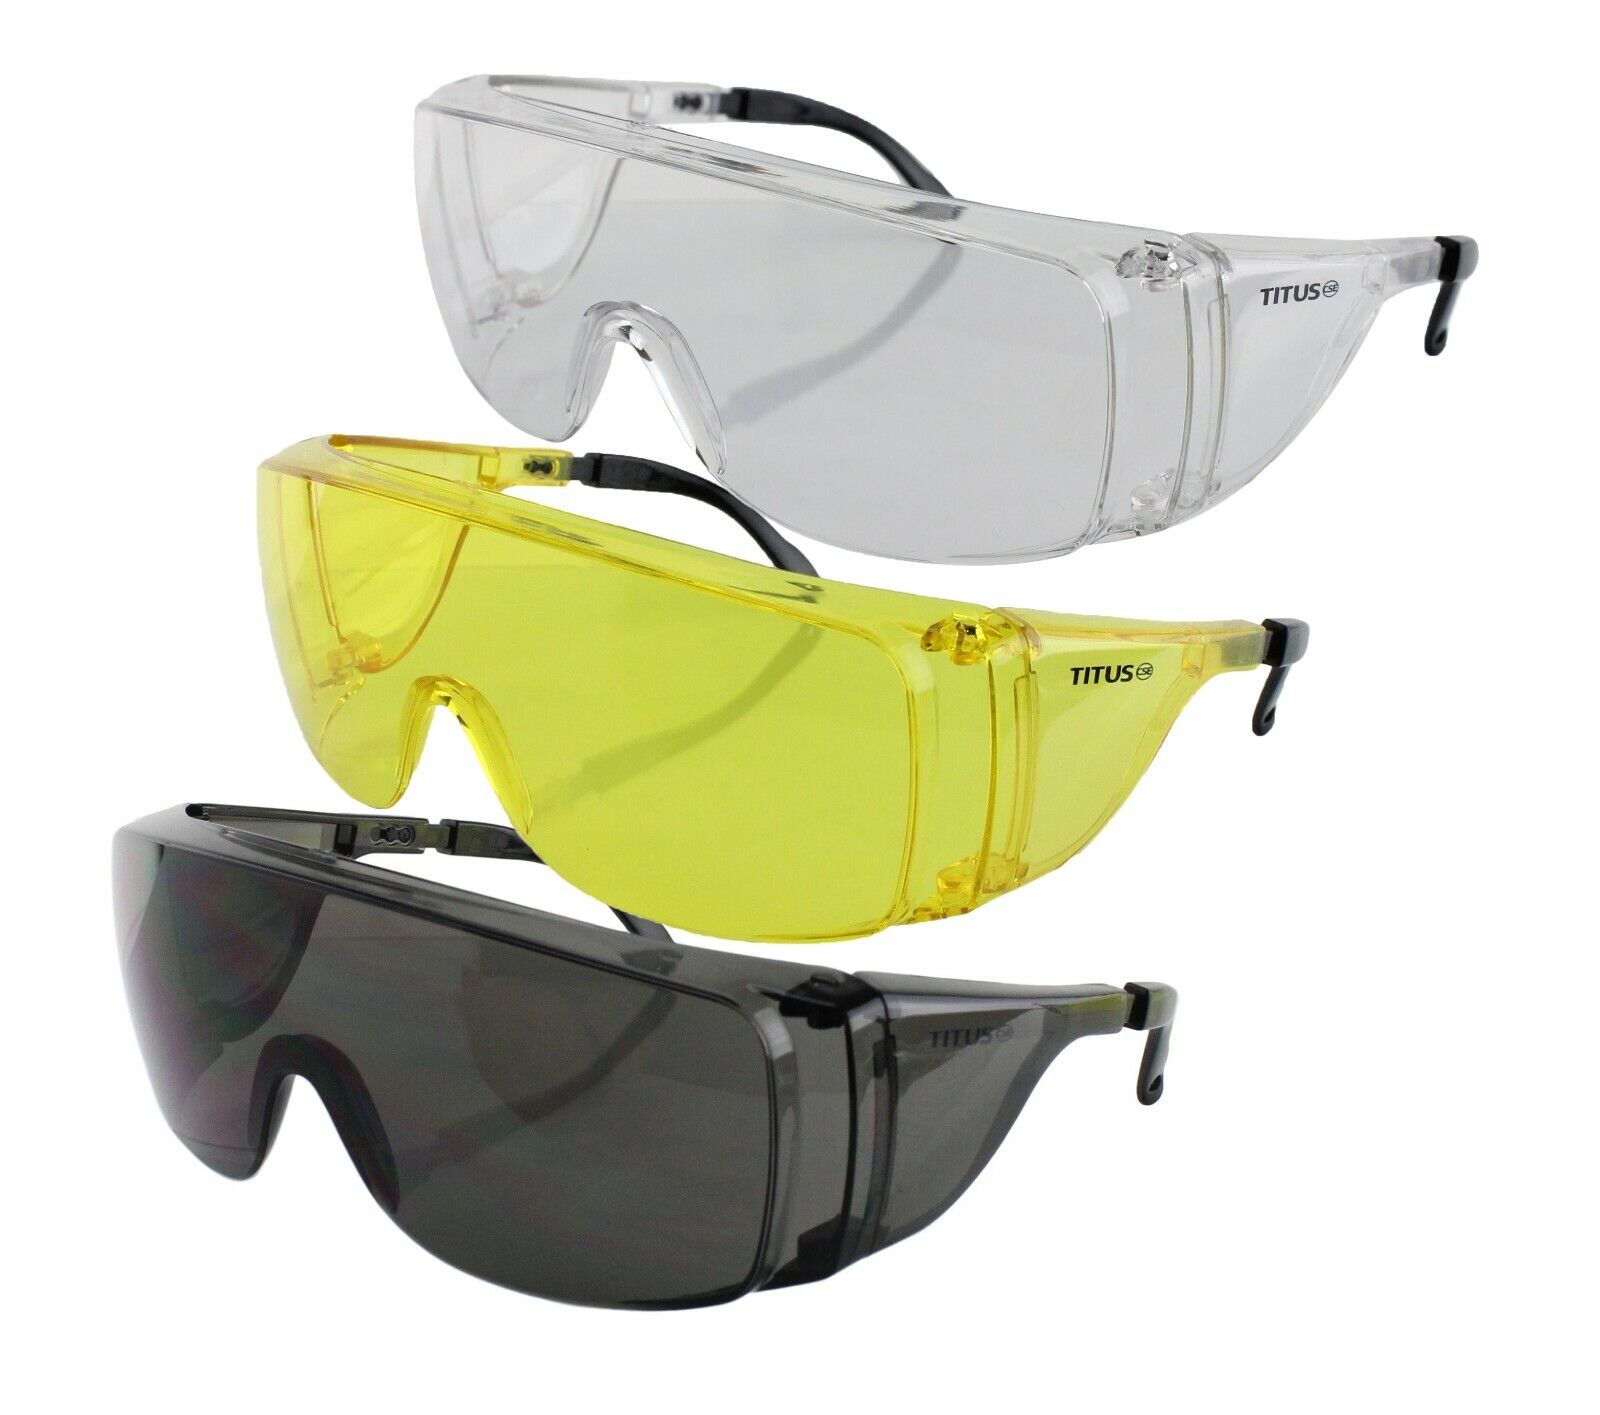 Titus Safety Glasses Shooting Eyewear Motorcycle Protection ANSI Z87 Fit Over RX